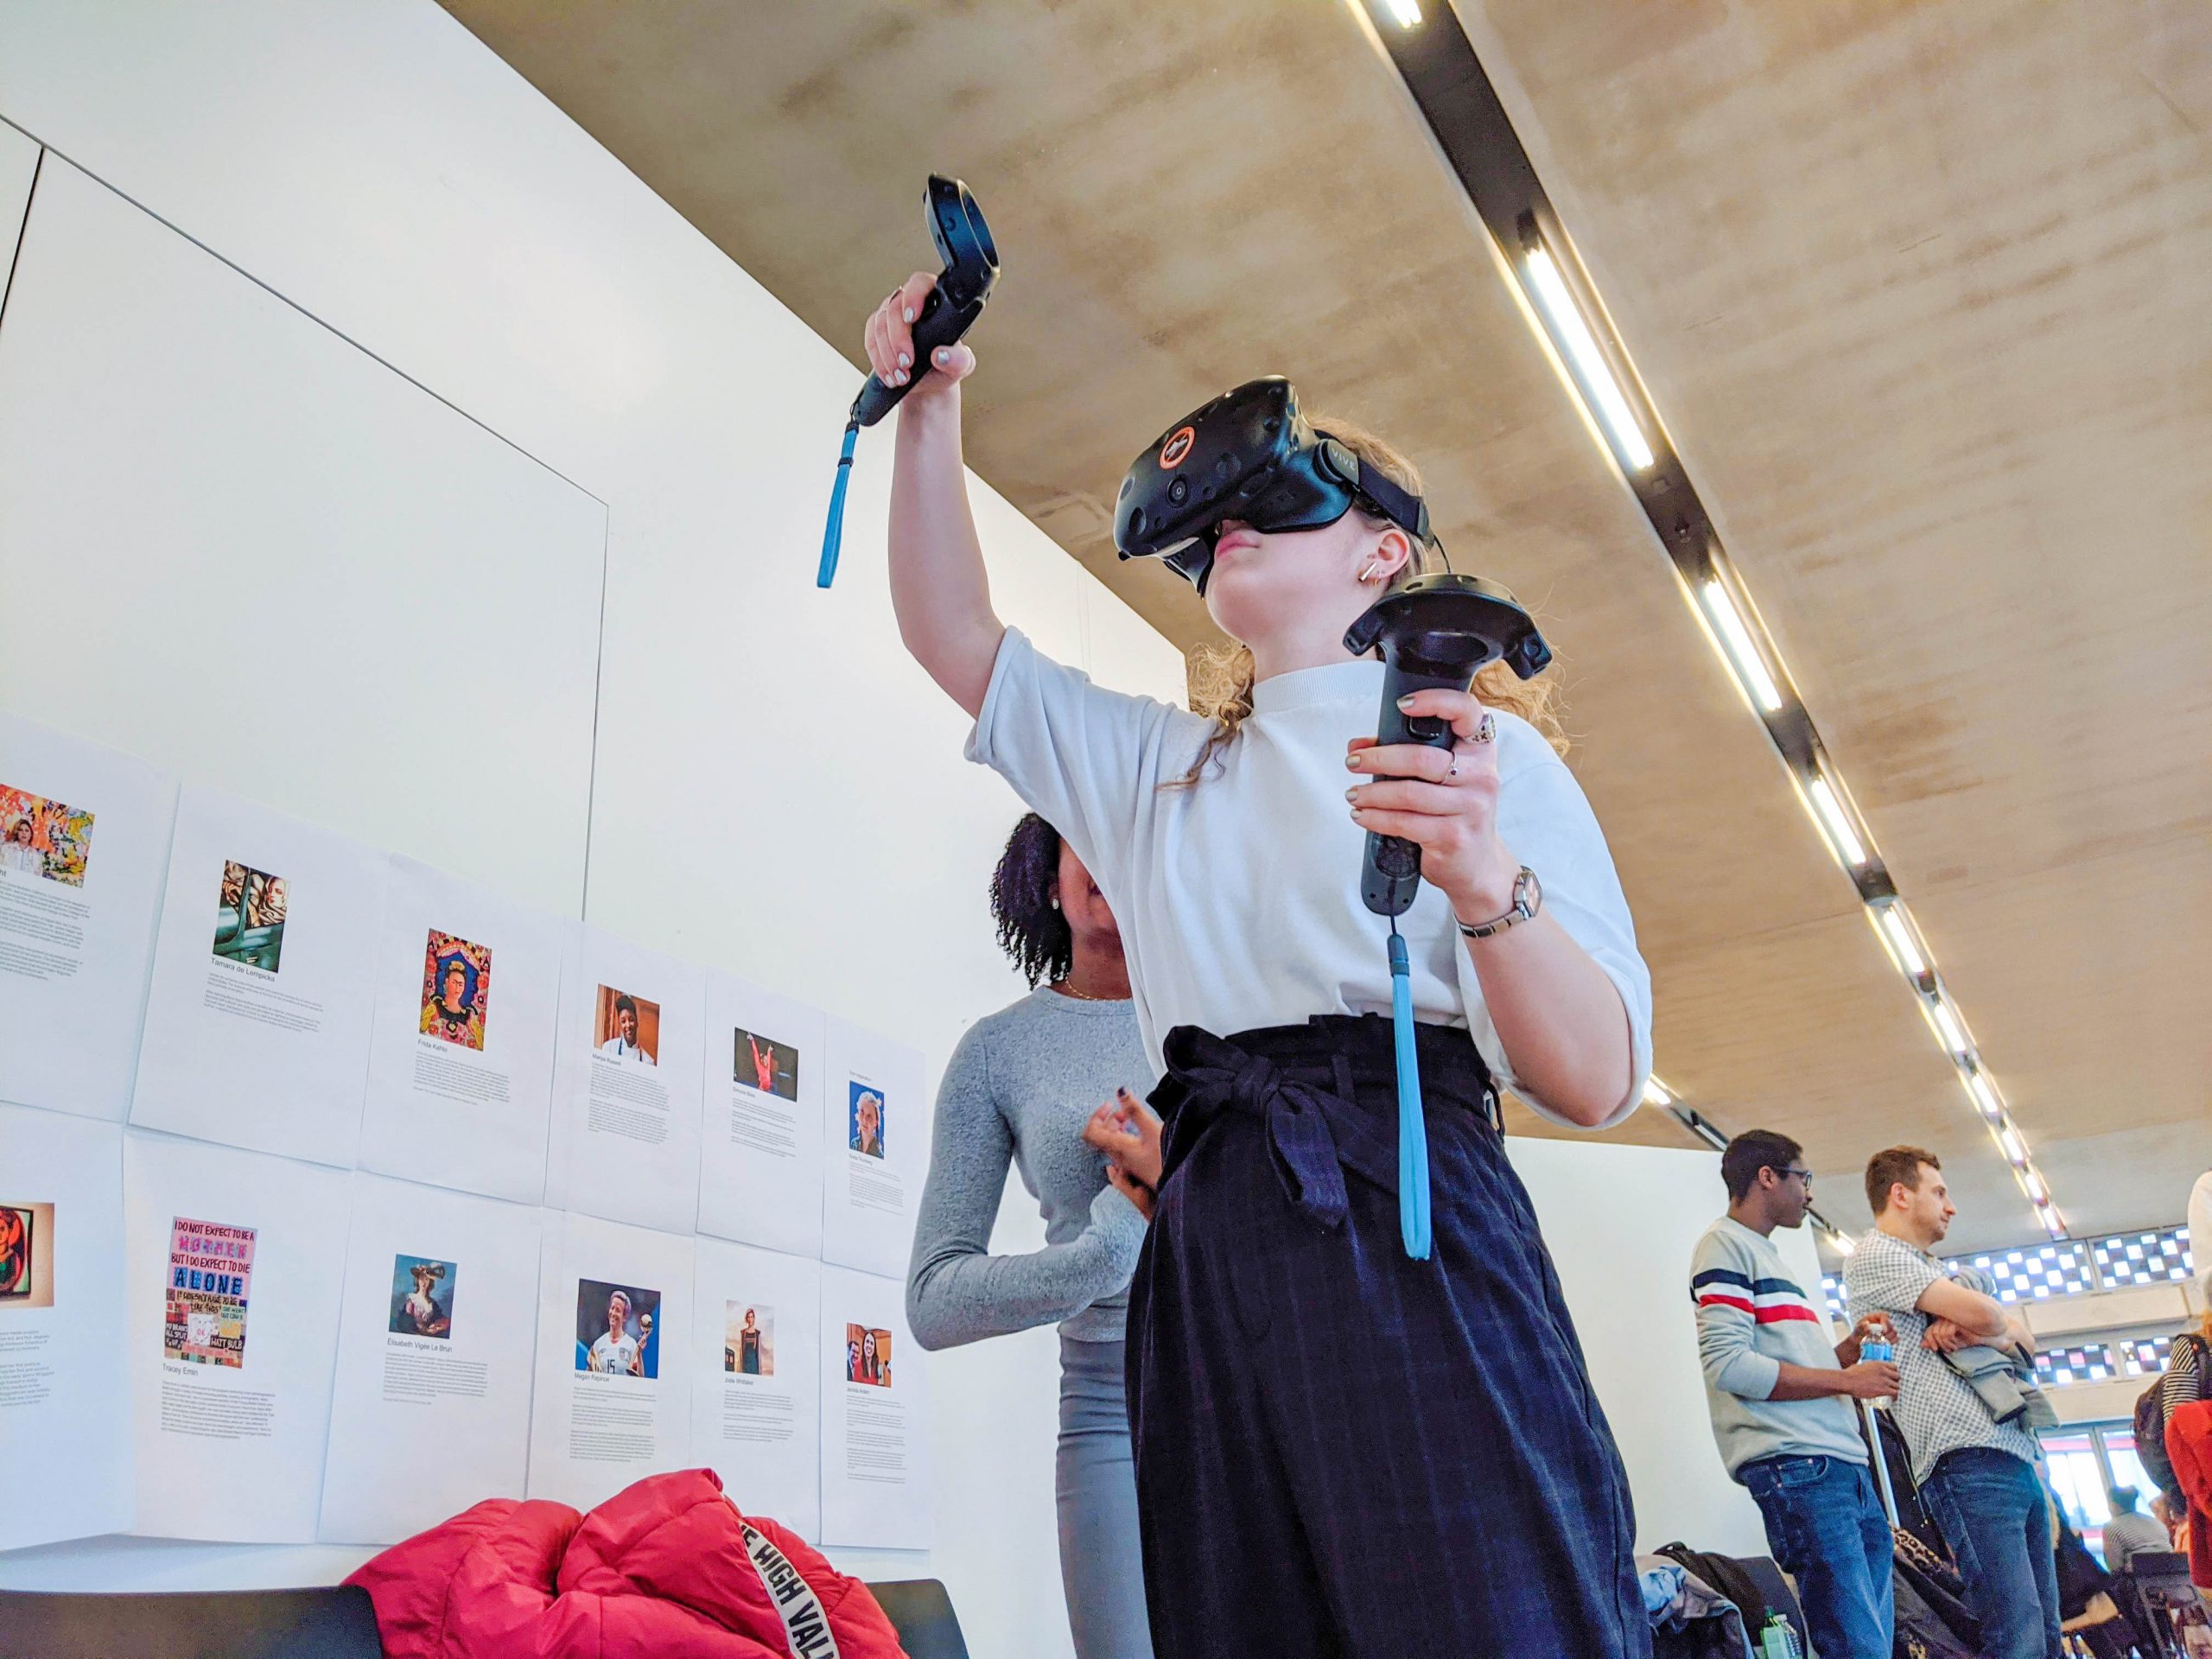 woman wearing VR headset and holding controllers. Looking up